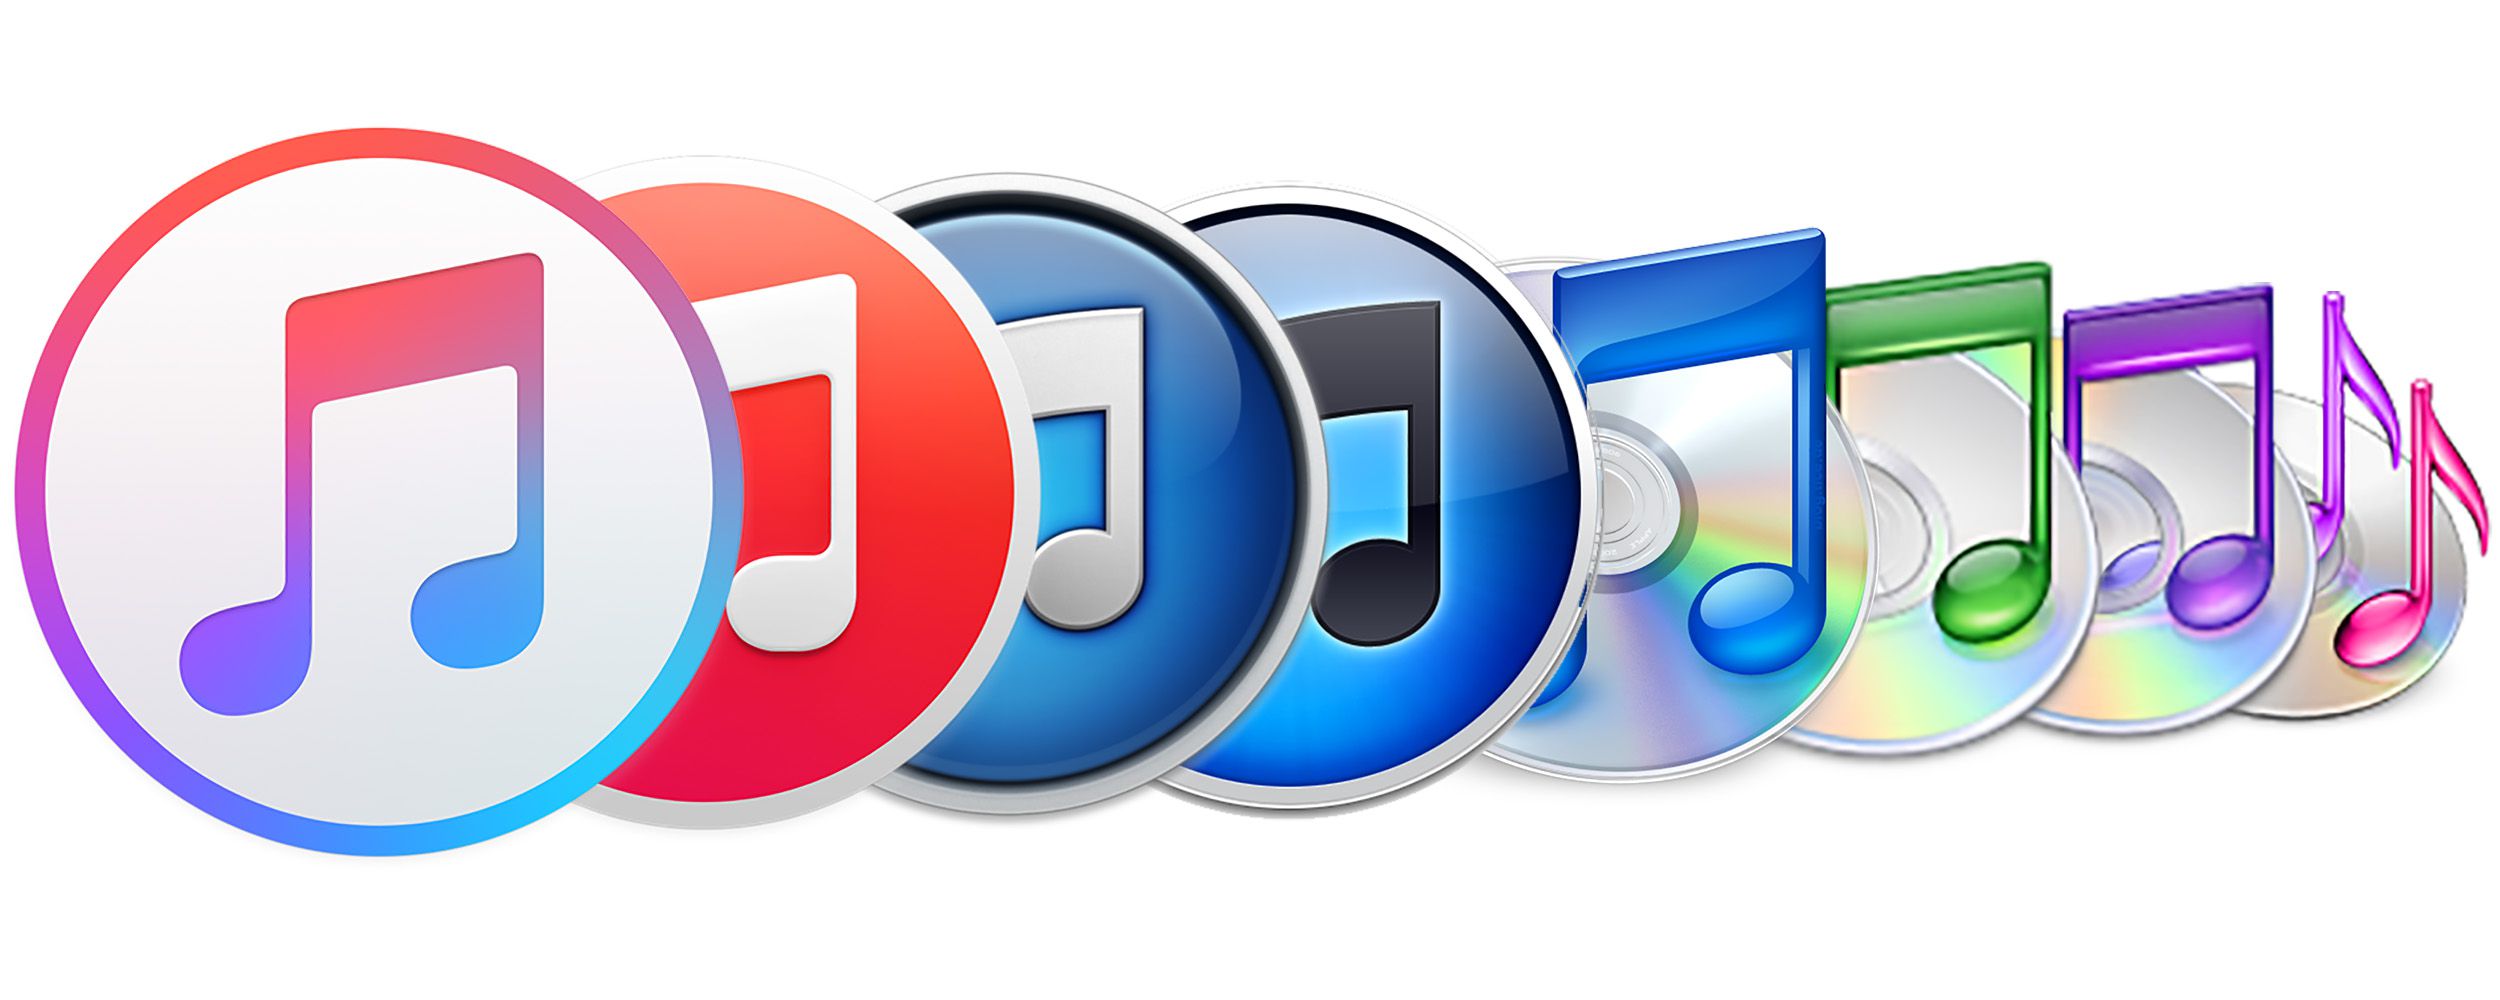 old versions of itunes for mac